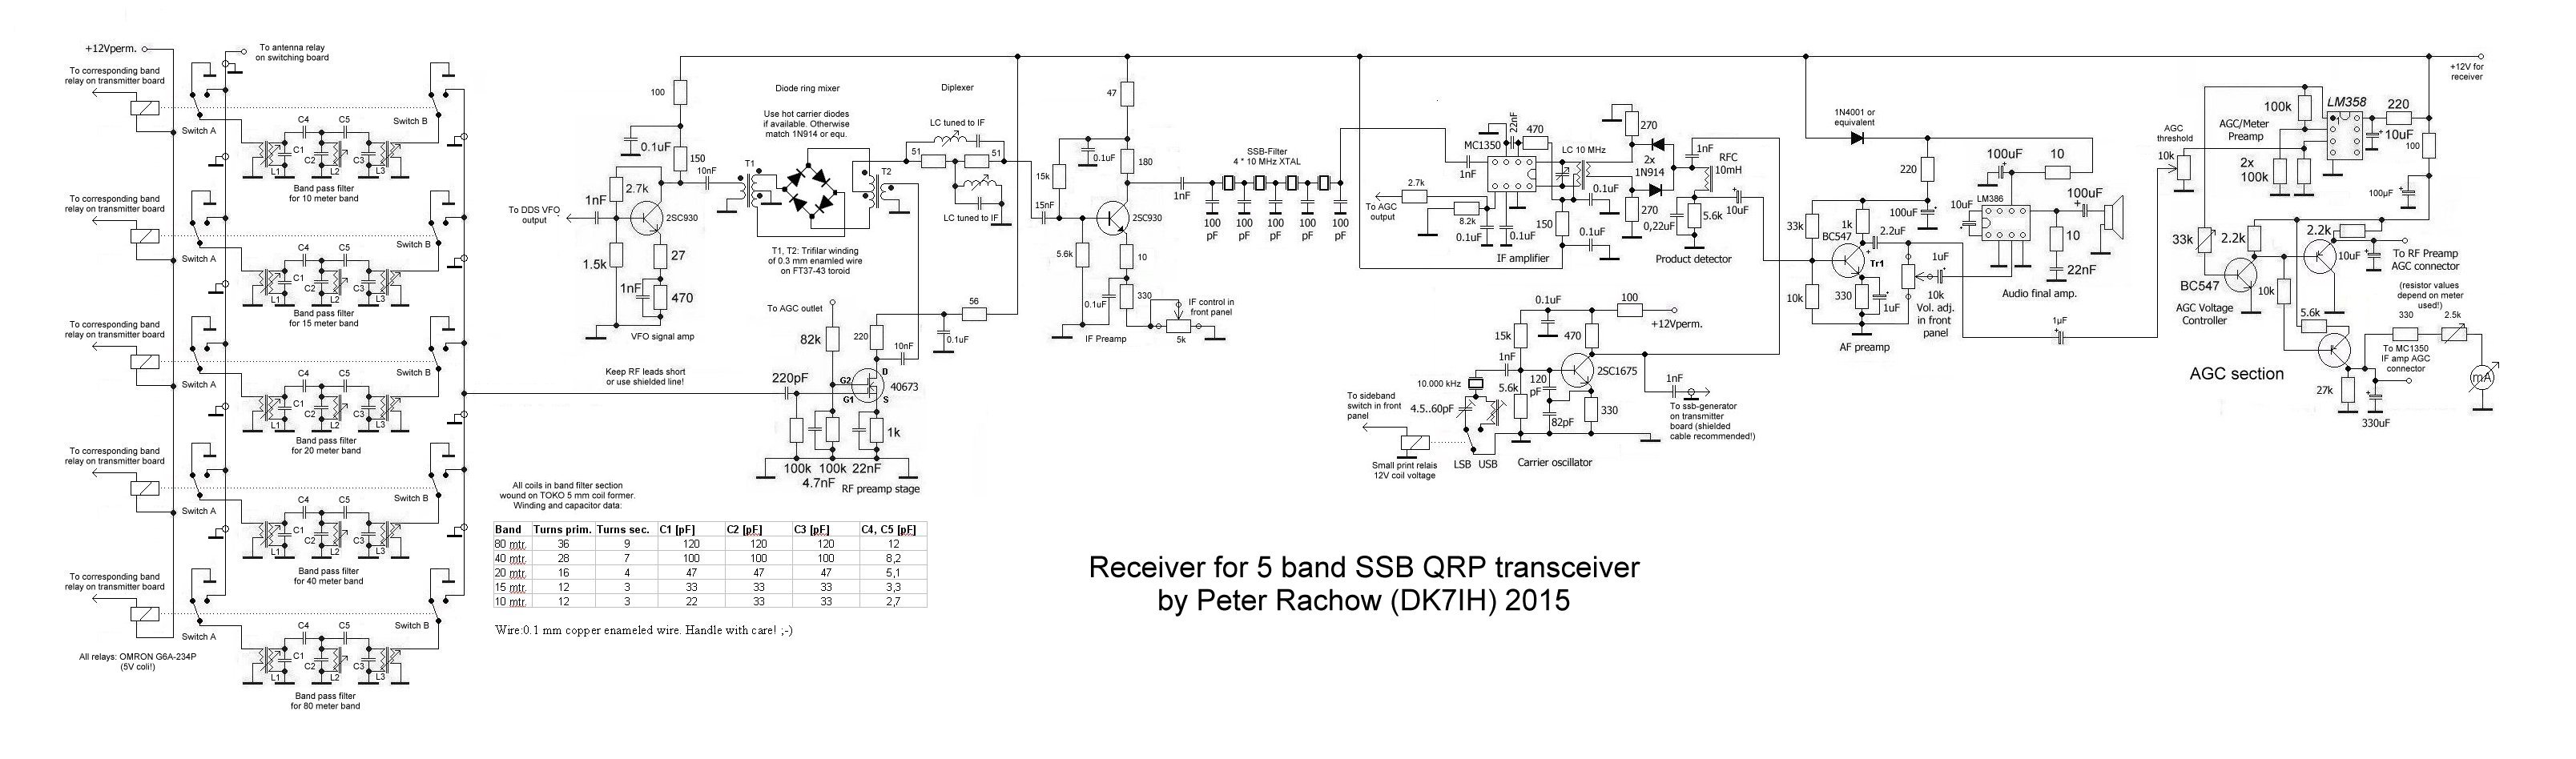 Receiver section for 5 band qrp transceiver by DK7IH (Peter Rachow)